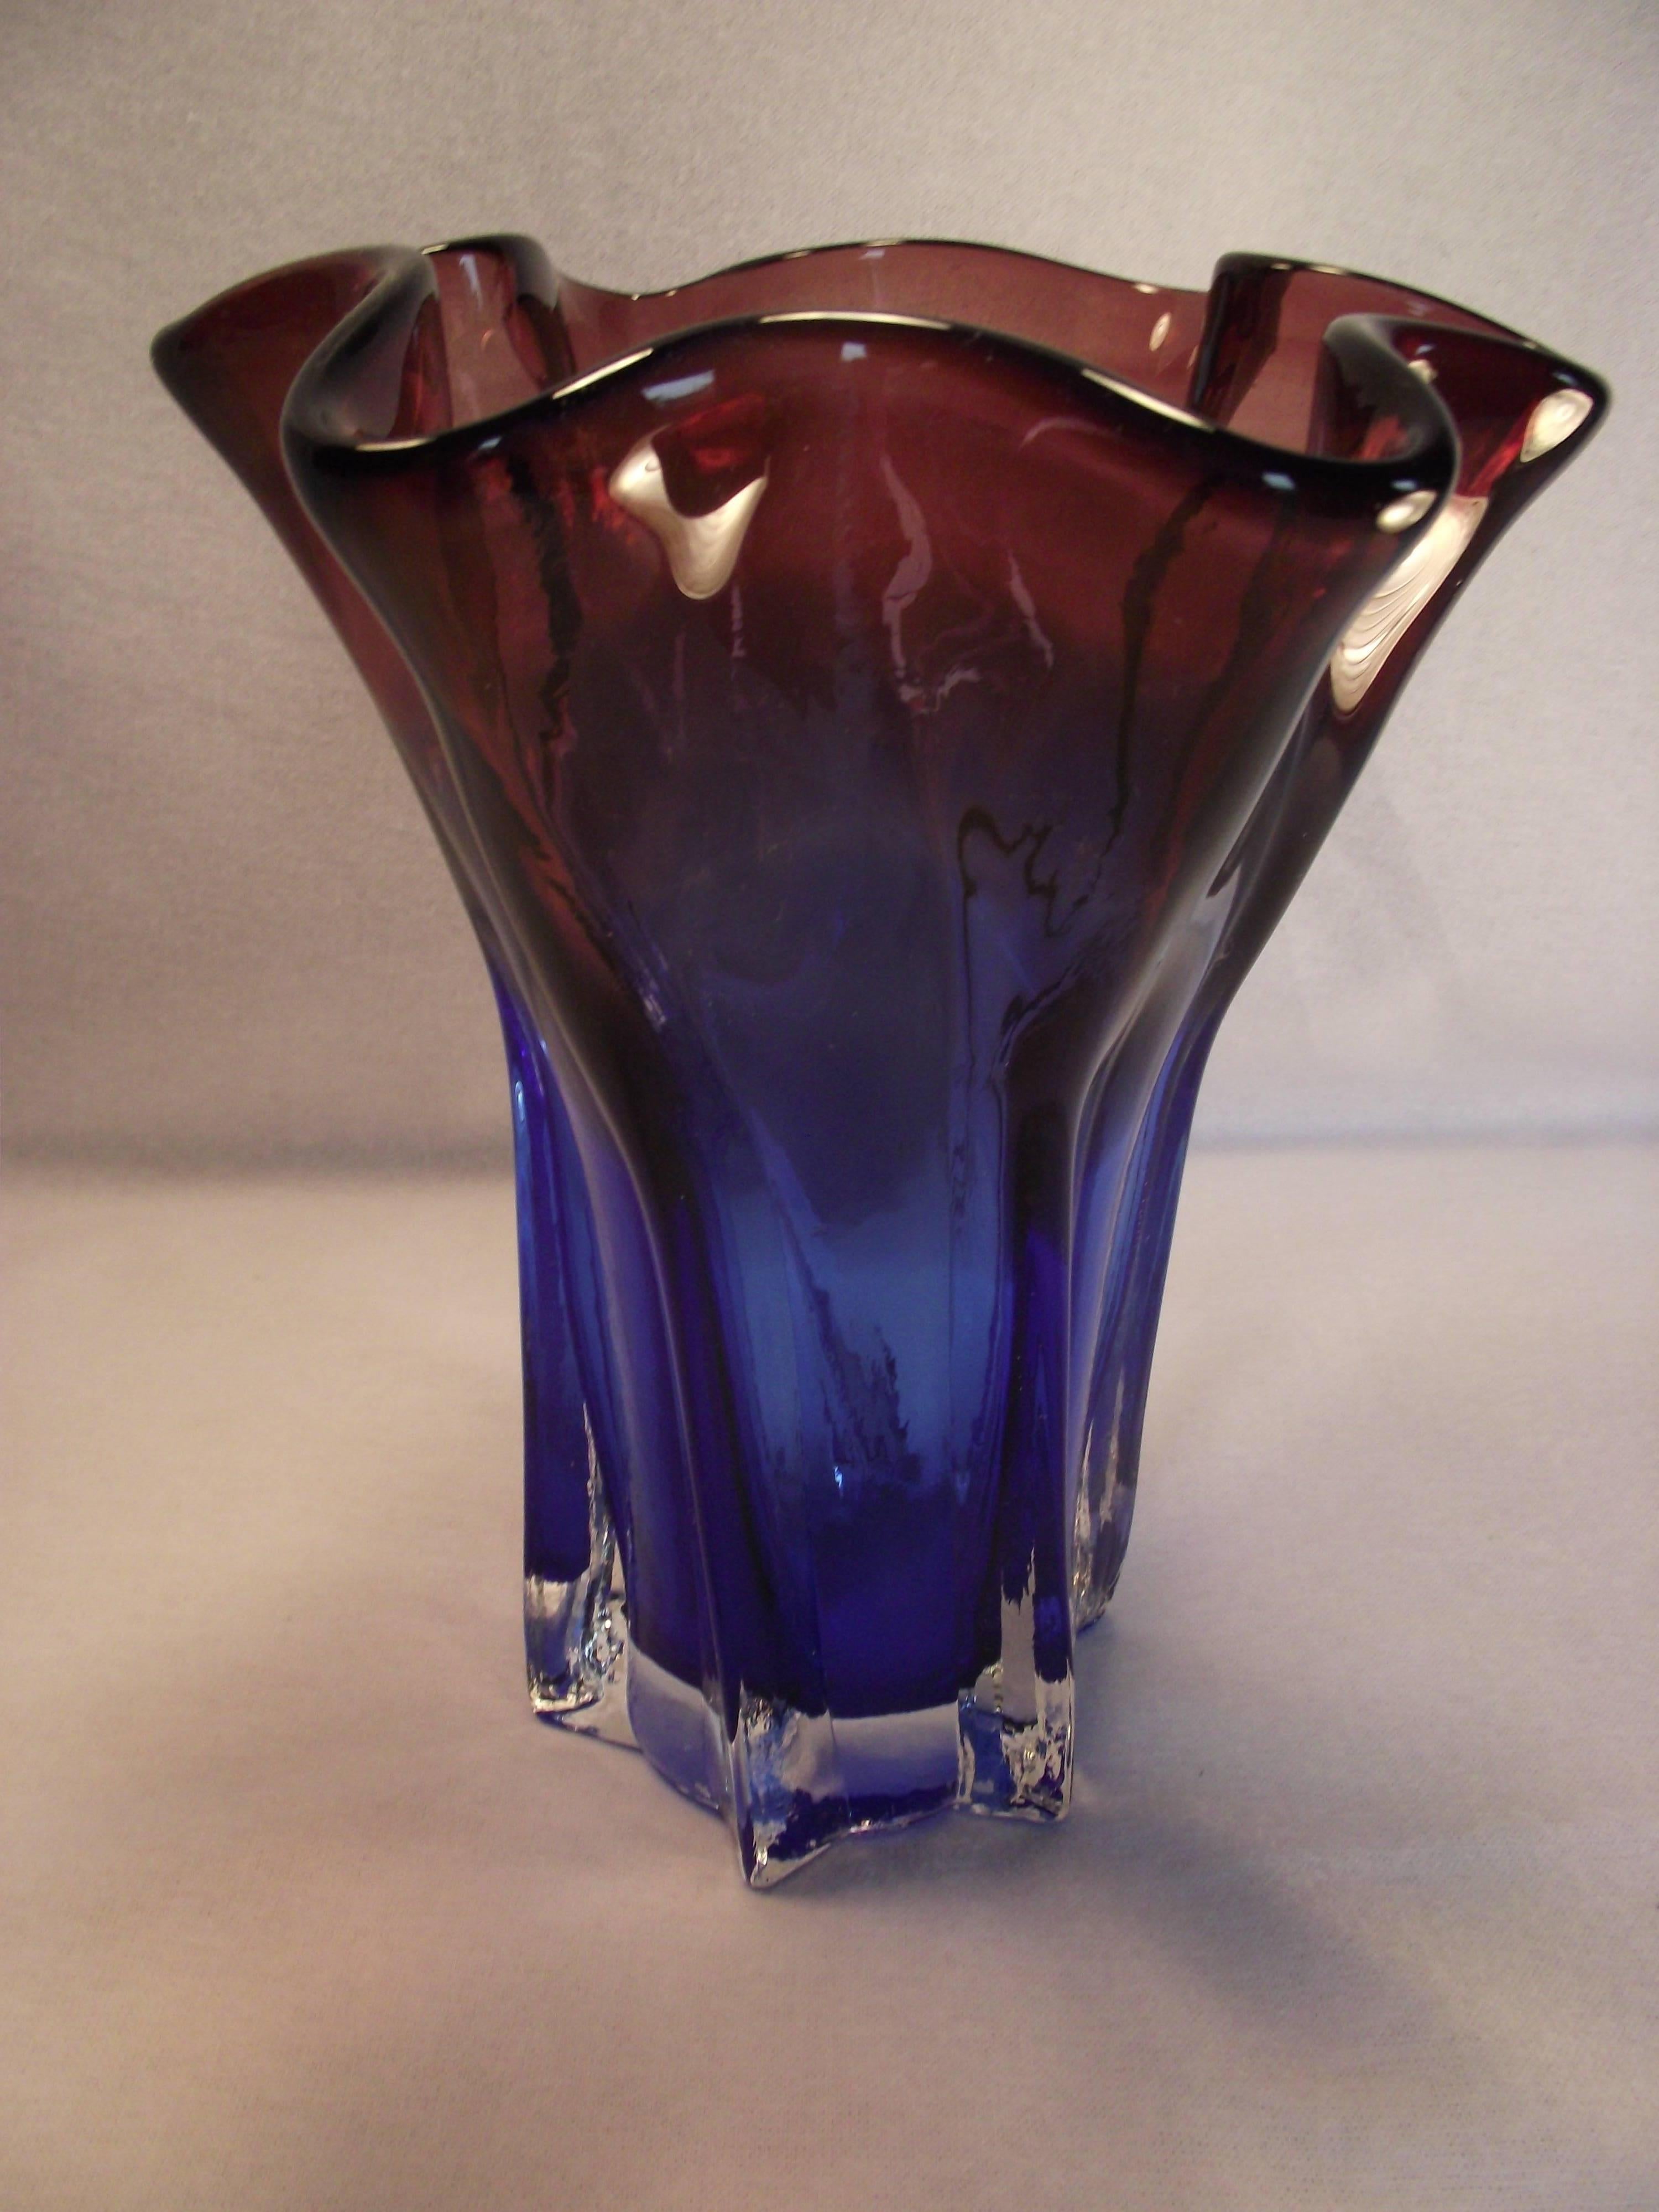 Beautiful blown art glass vase in clear, blue and amber glass.
Good condition. It has two barely noticeable small bubbles in the glass (see picture).